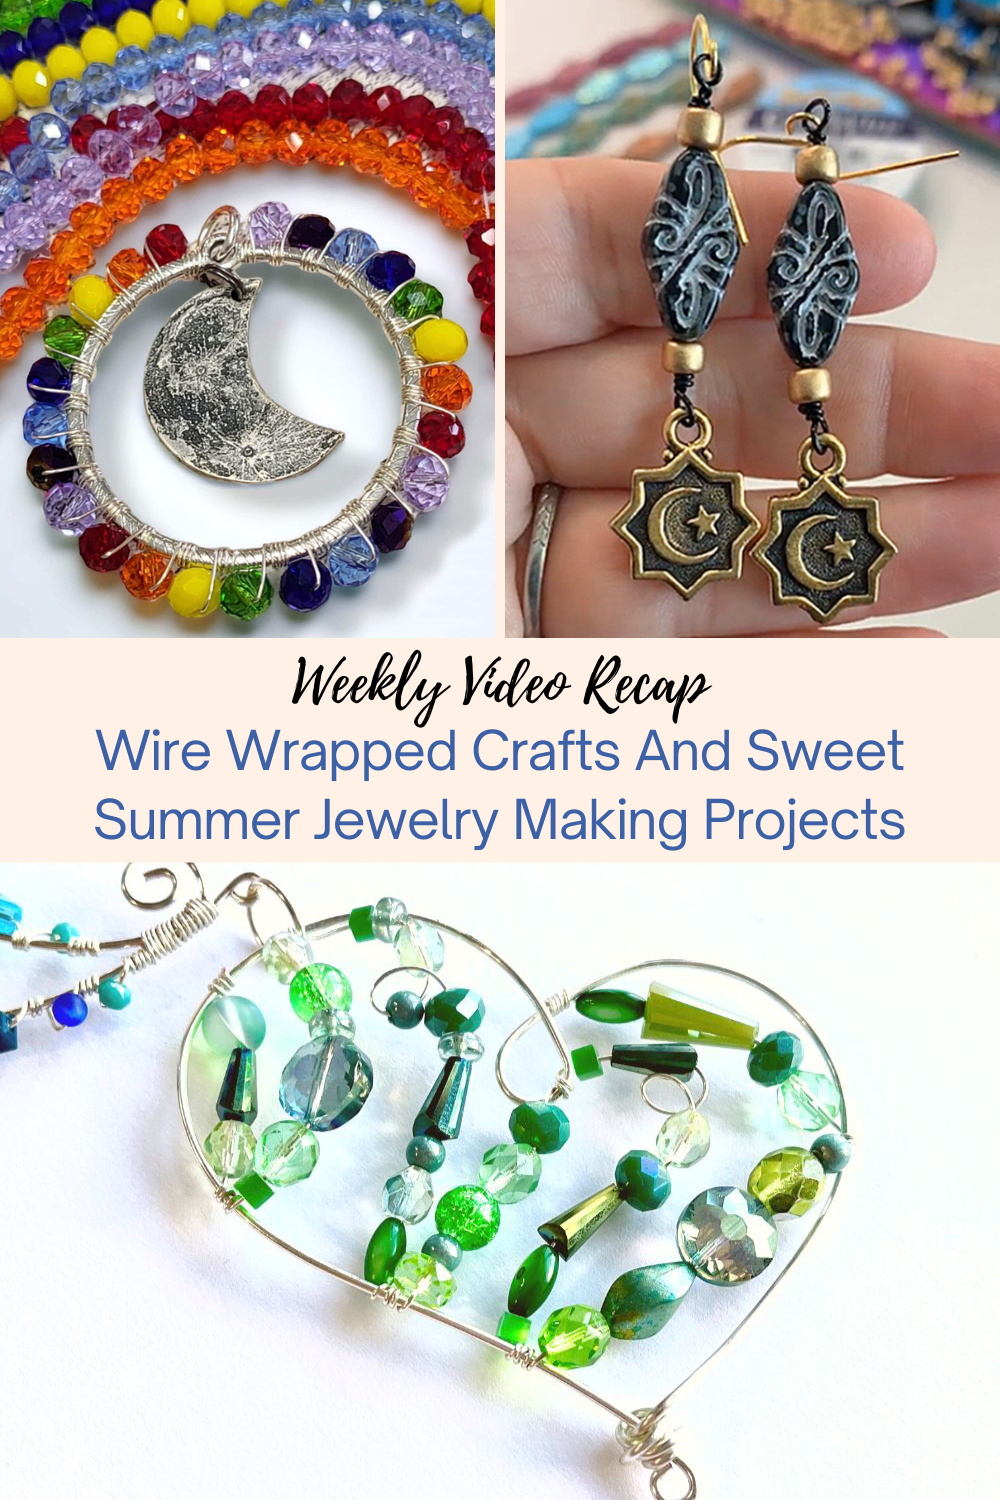 Wire Wrapped Crafts And Sweet Summer Jewelry Making Projects Collage